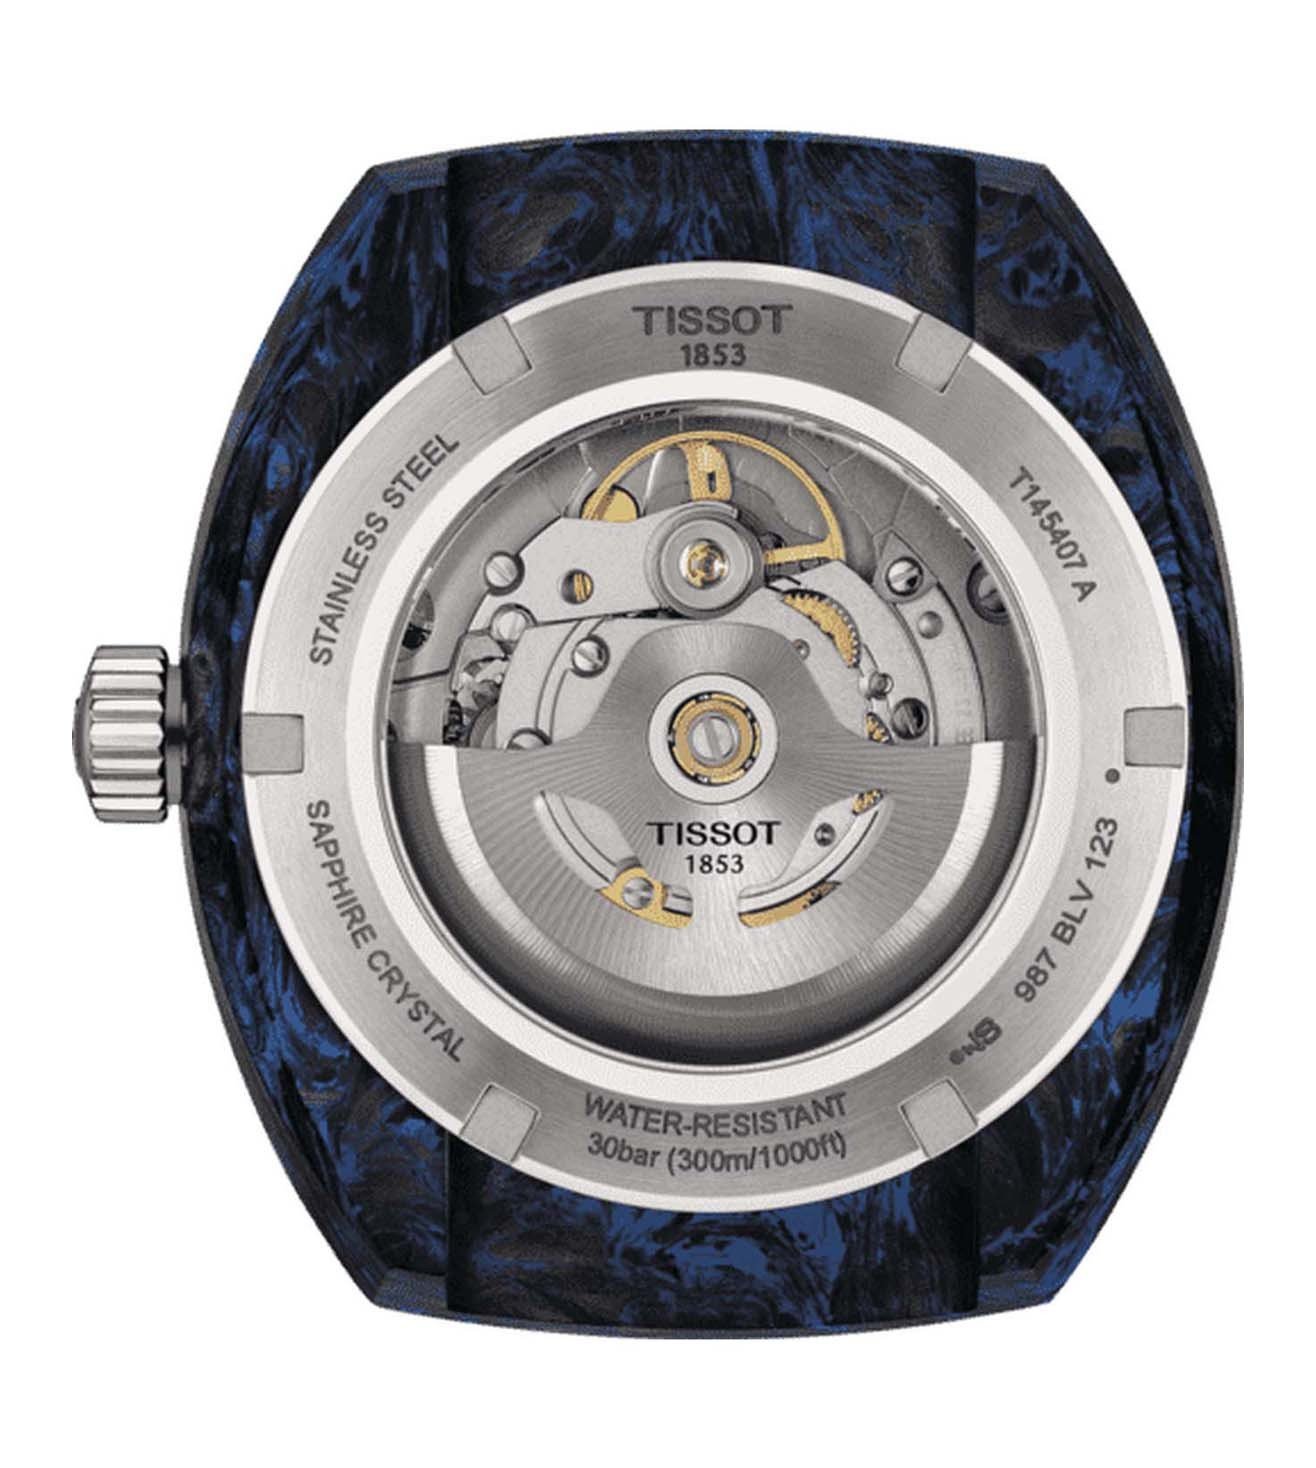 T1454079705701  |  Sideral S T-Sport Watch for Men